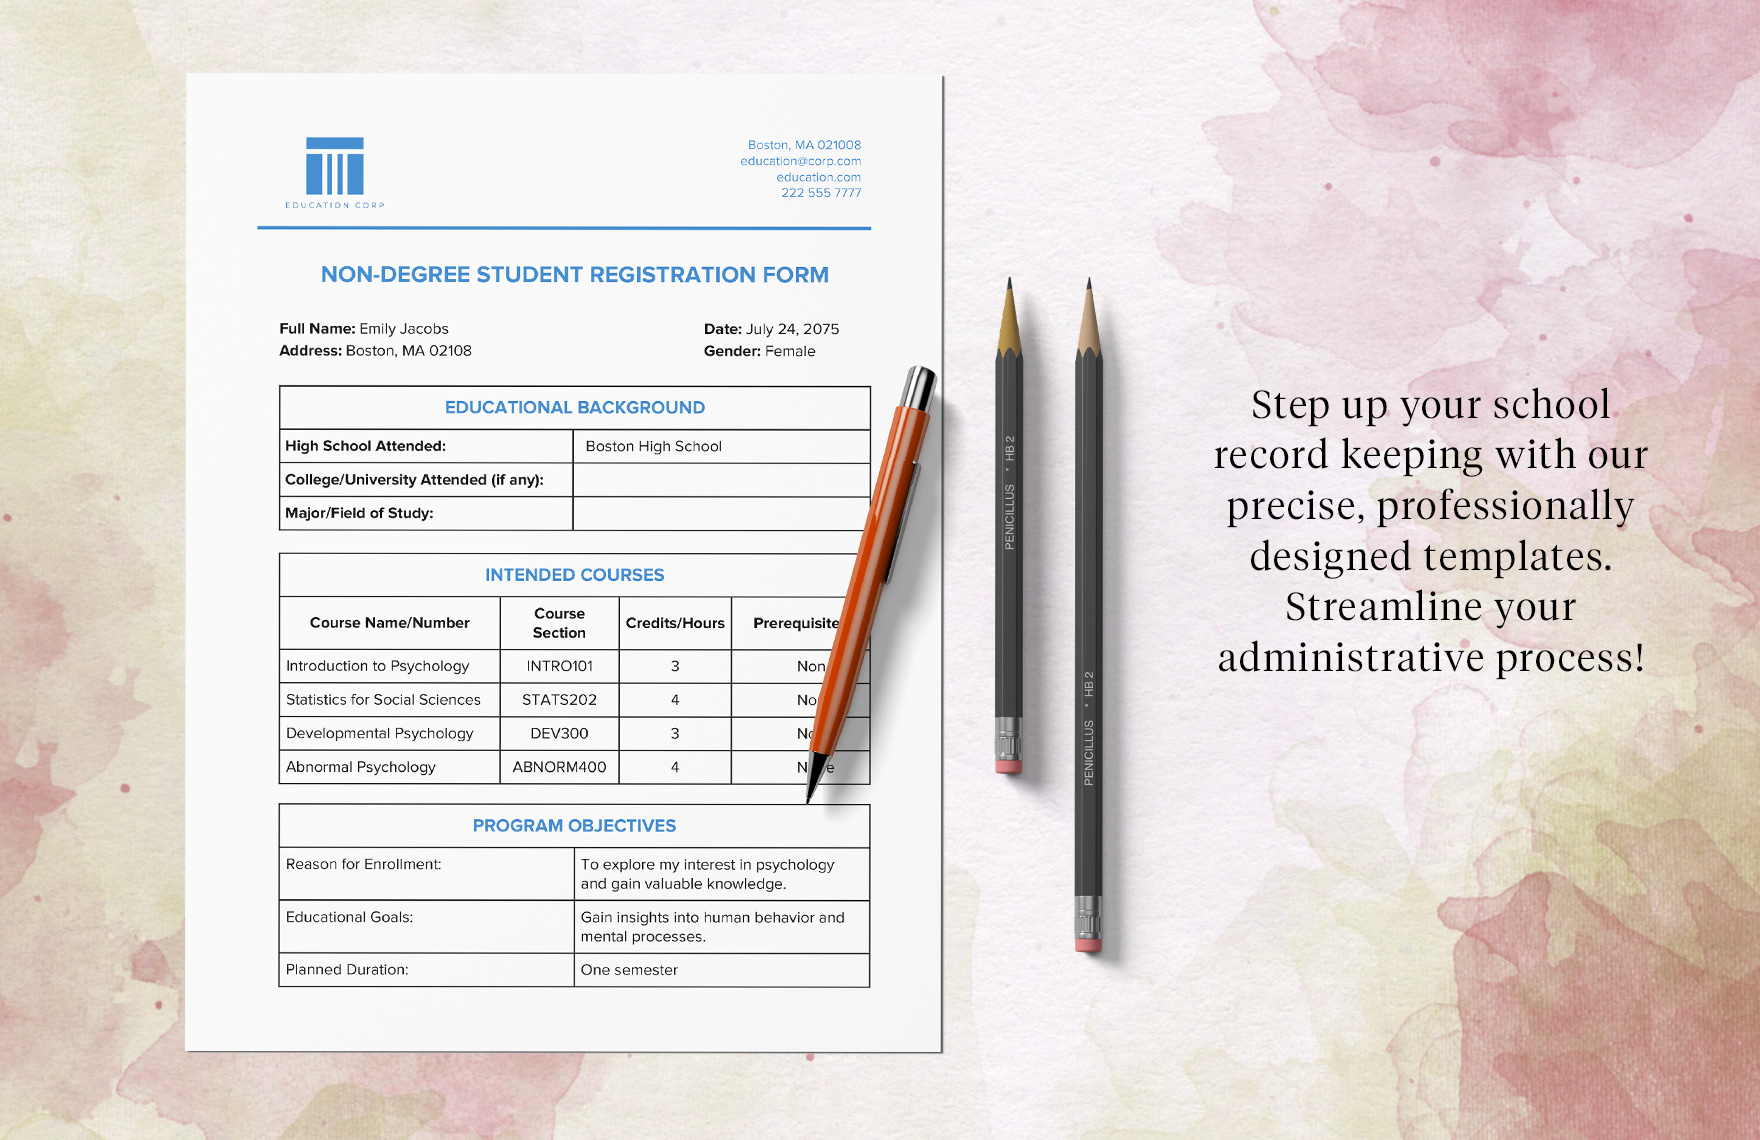 Non-Degree Student Registration Form Template